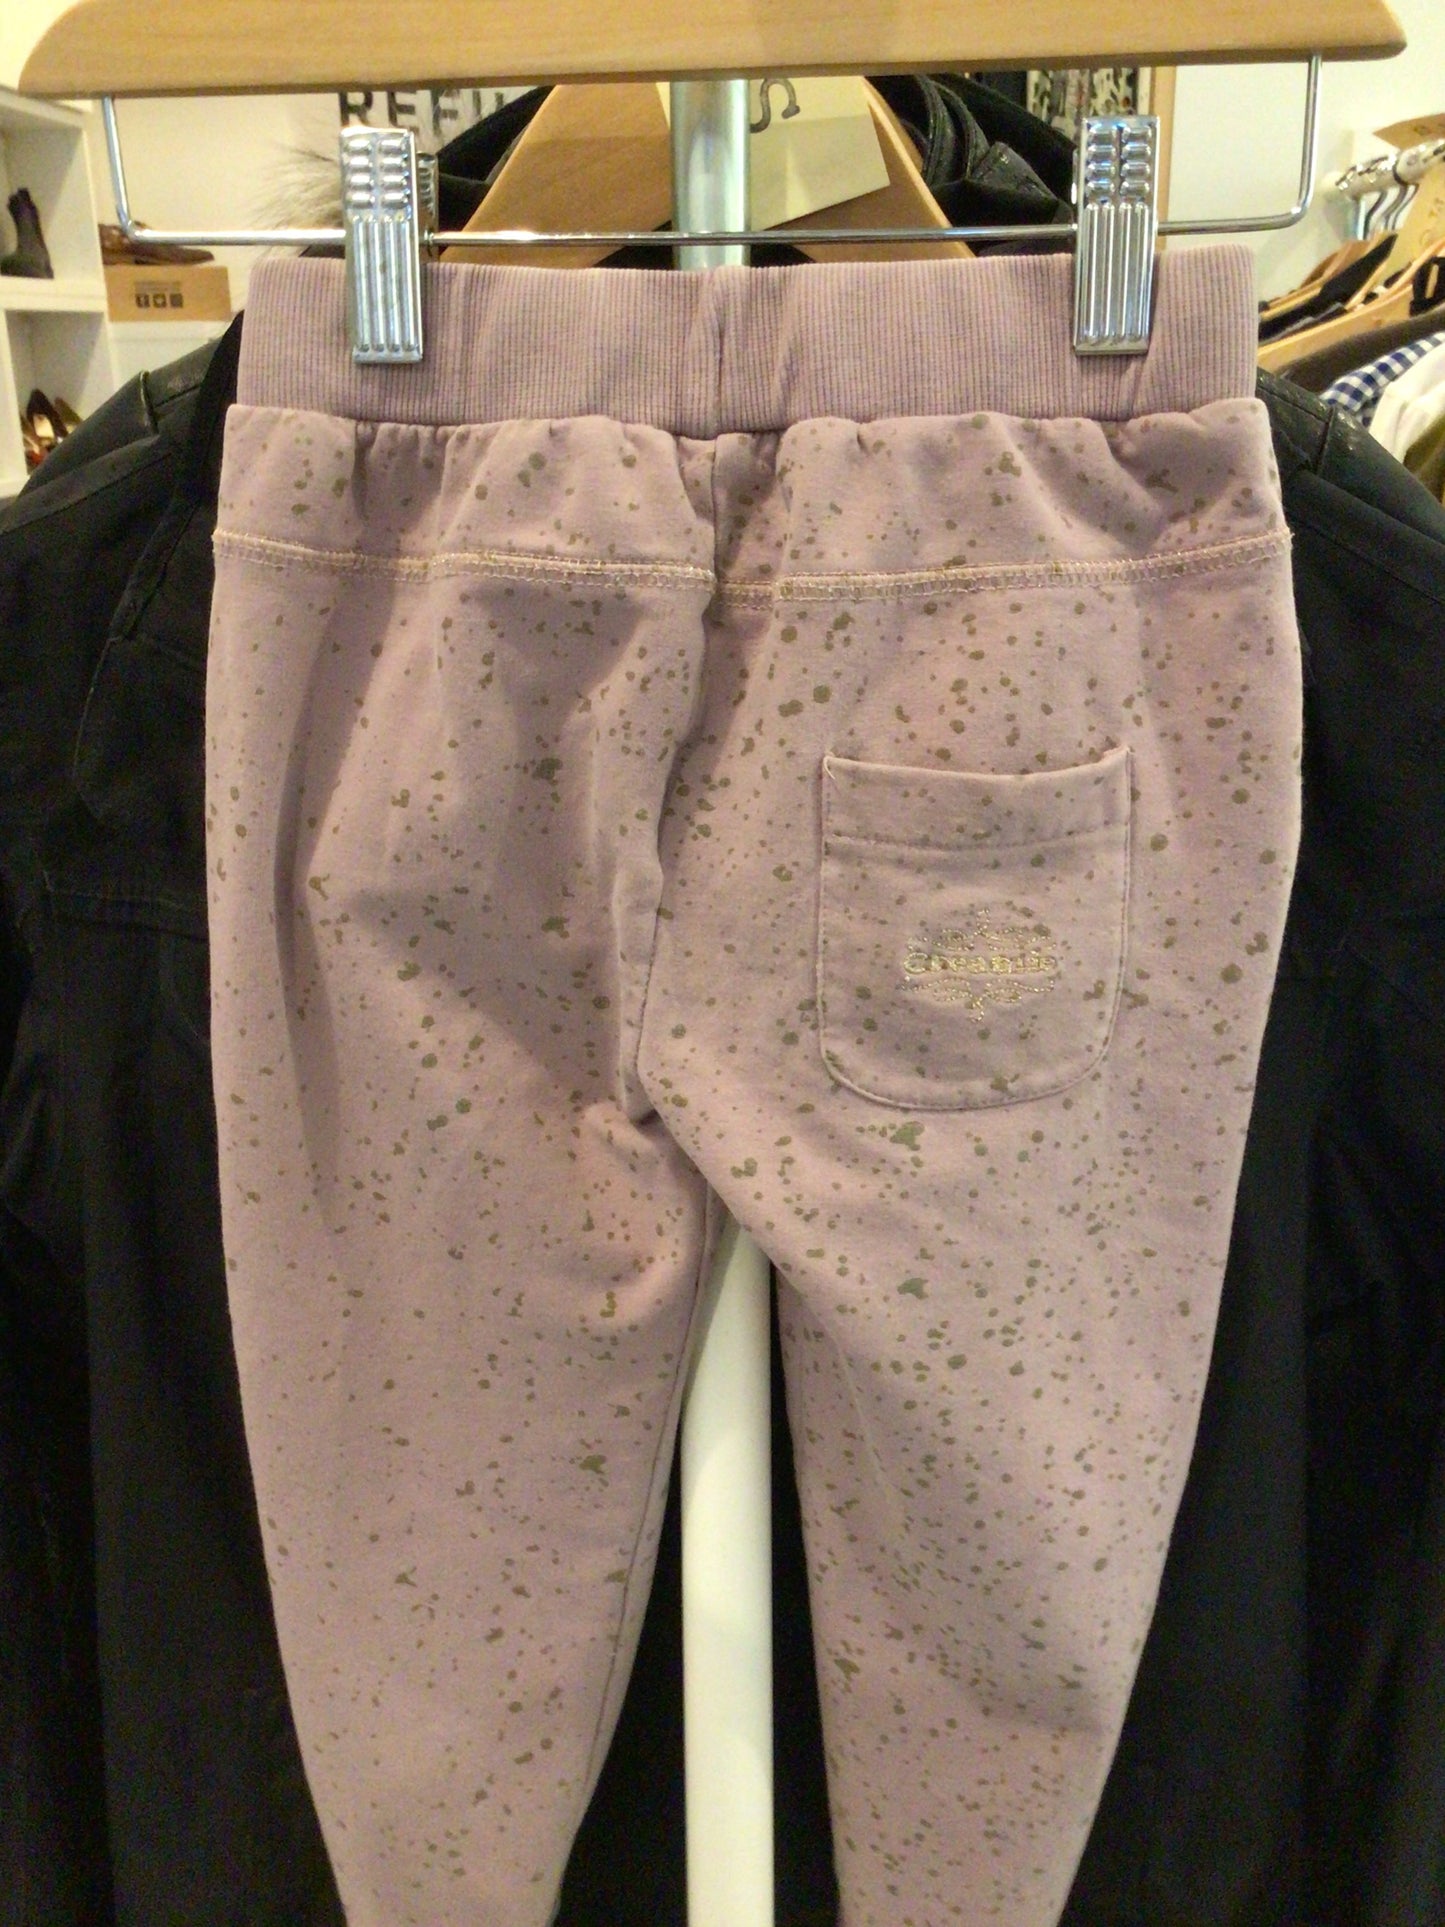 Consignment 2653-03 Creamie pink & brown dots sweat pants. Age 3.